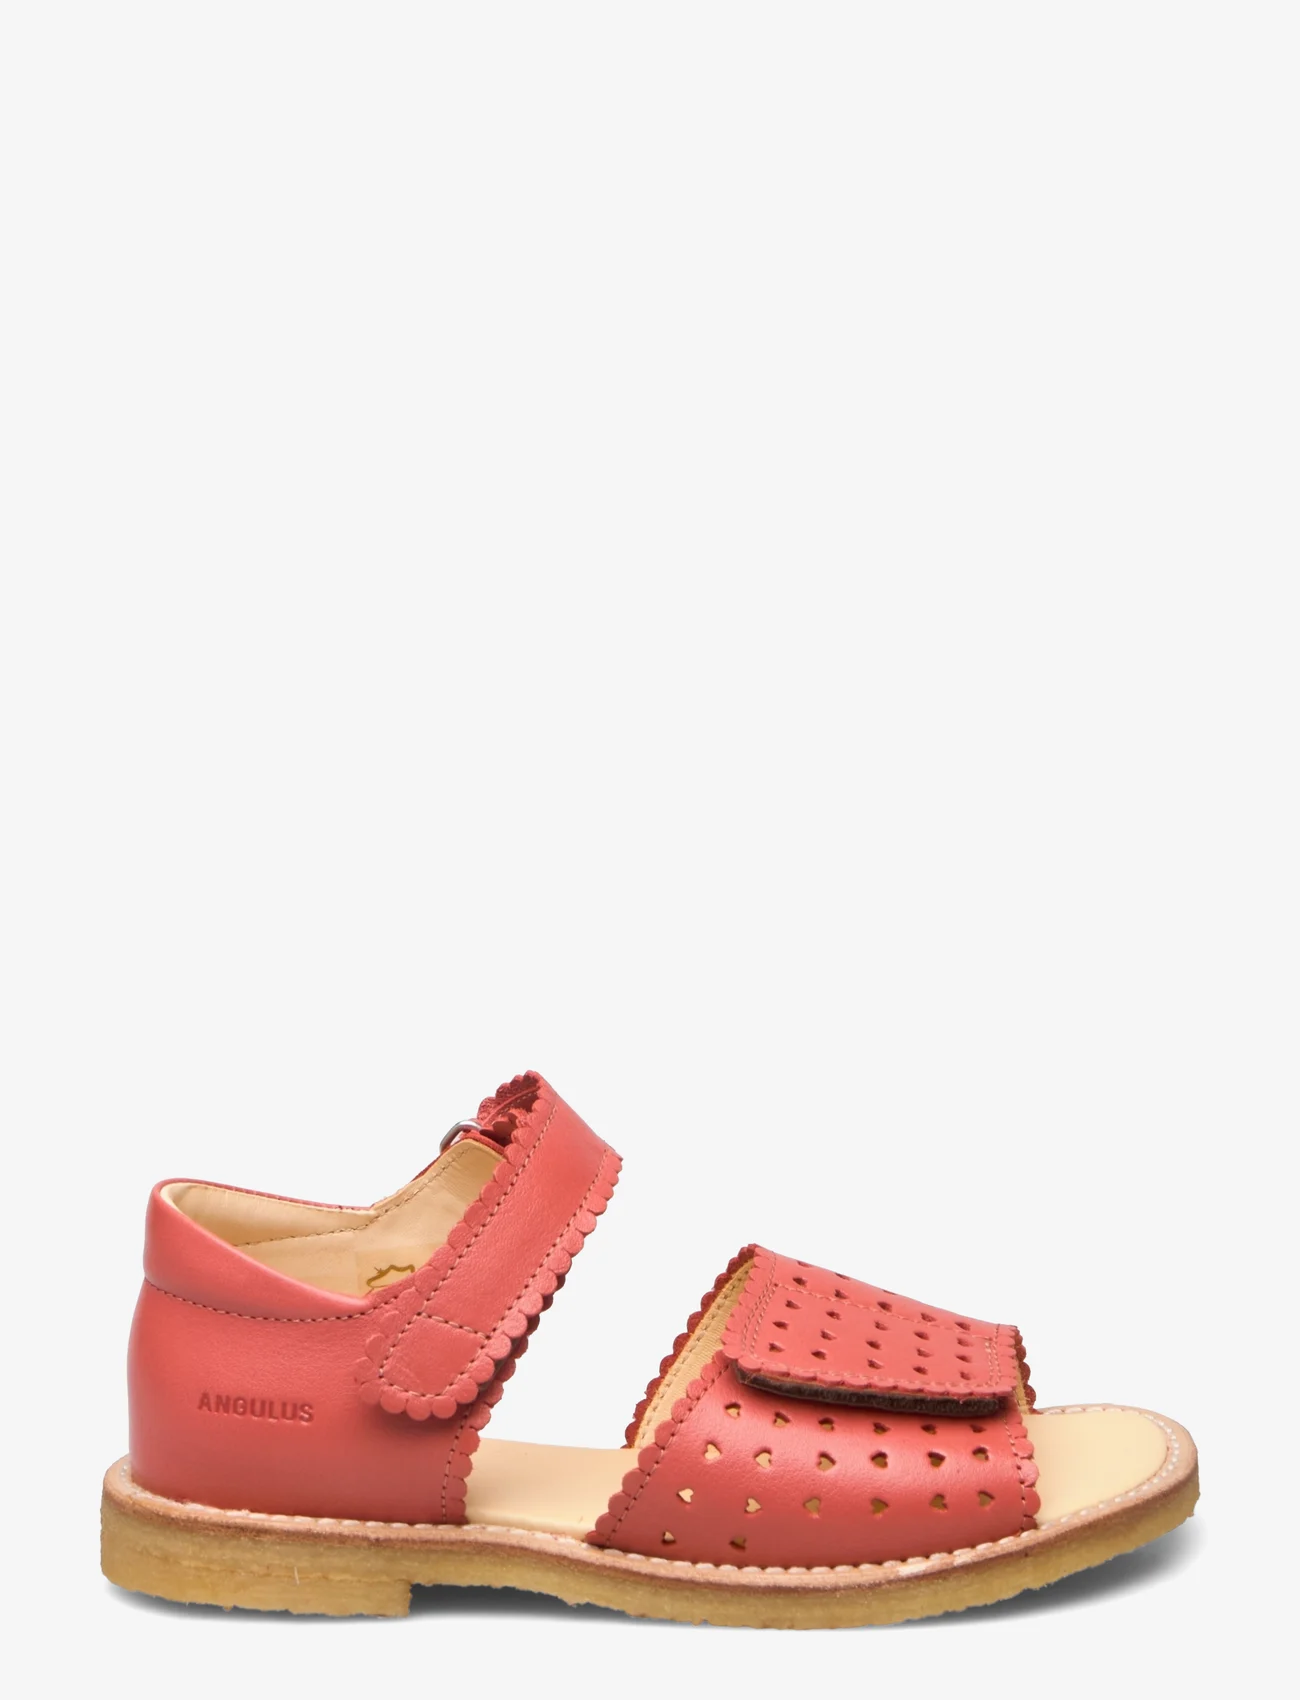 ANGULUS - Sandals - flat - open toe - clo - sommarfynd - 1591 coral - 1